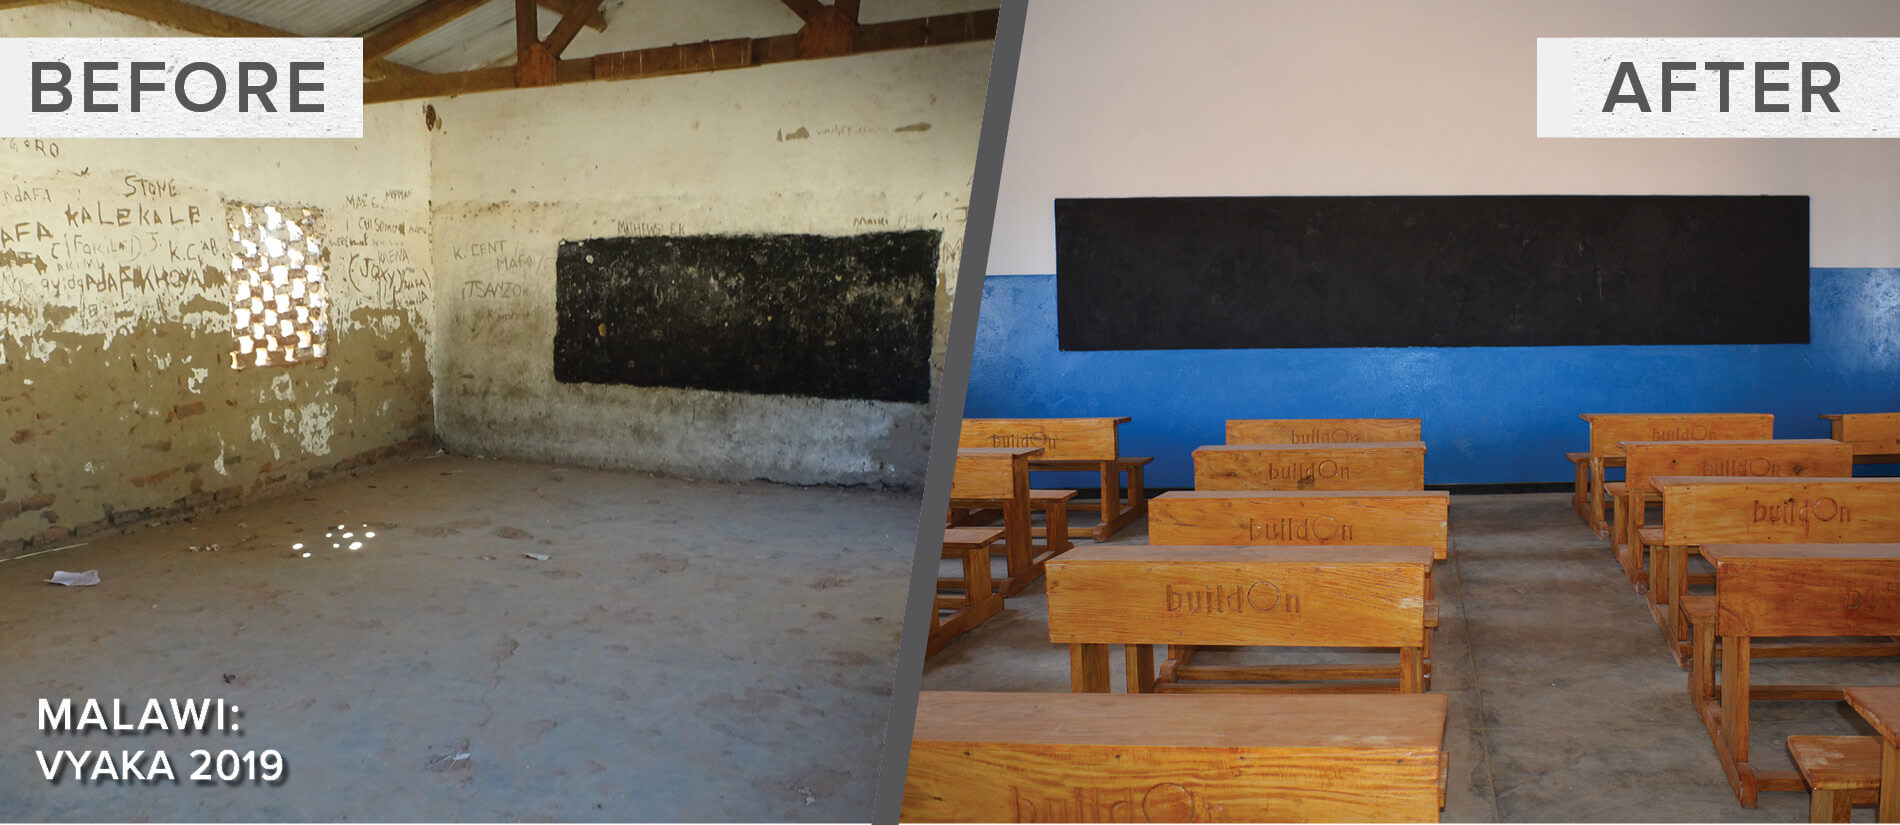 buildOn - Vyaka Malawi - Before and After - Website Graphic_1900x825 - Dual Concept - 2021 (1)